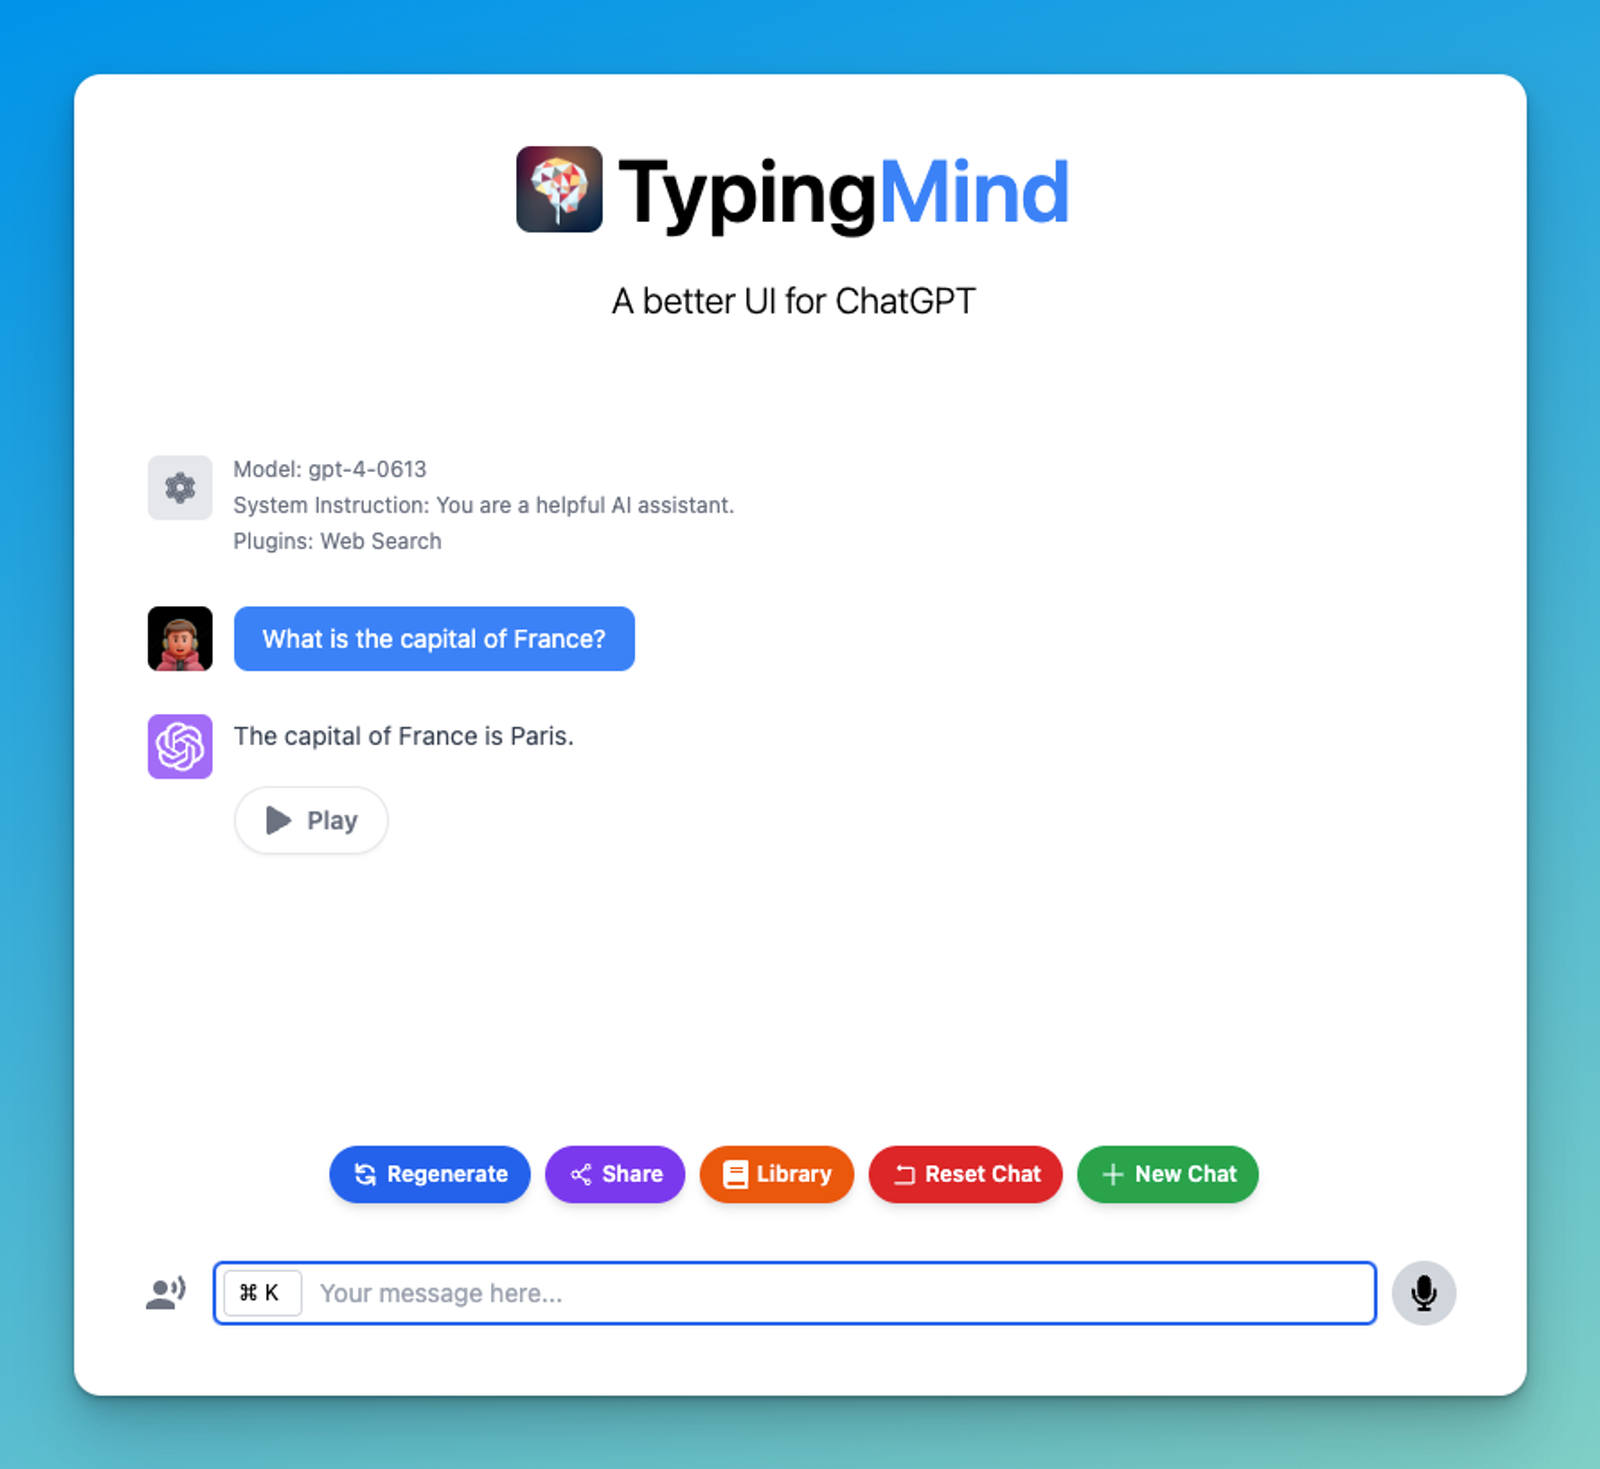 Directly ask any questions on TypingMind